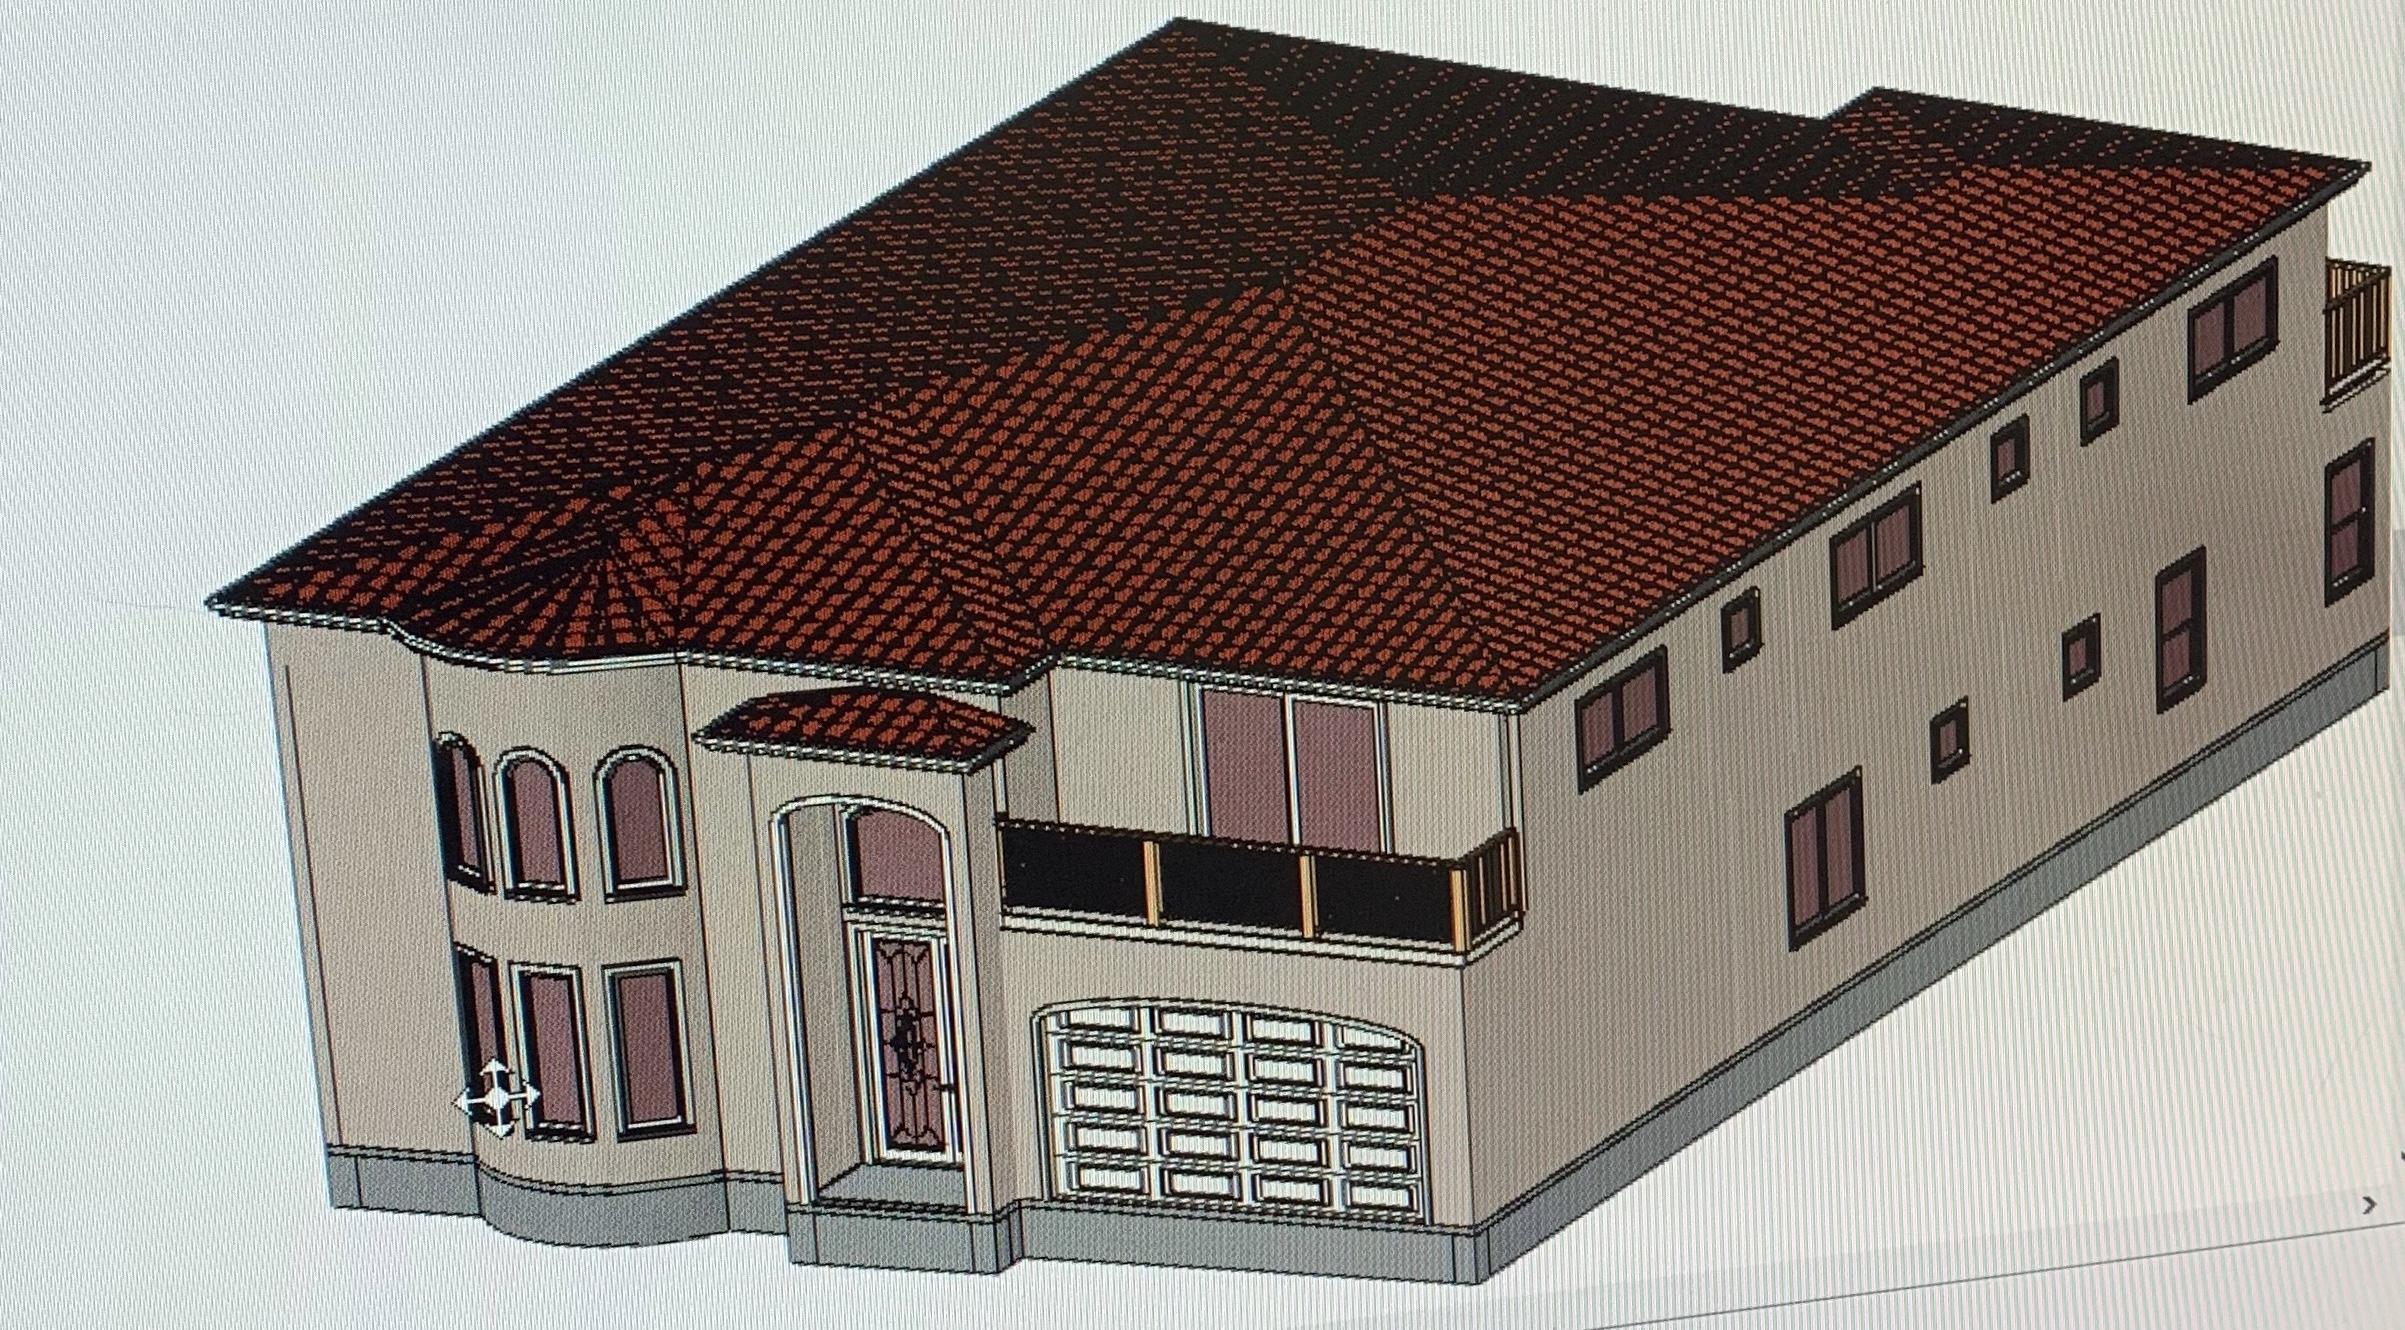 New Home Coming Soon. Large 6 Bedrooms, 7 Baths Approximately 5200 Sf. 1st floor- 2617sf, 2nd floor 2808 sf.2 Story with Pool & Spa. Now is the time to pick colors of tile, kitchen cabinets, Roof tile, stucco and much more.